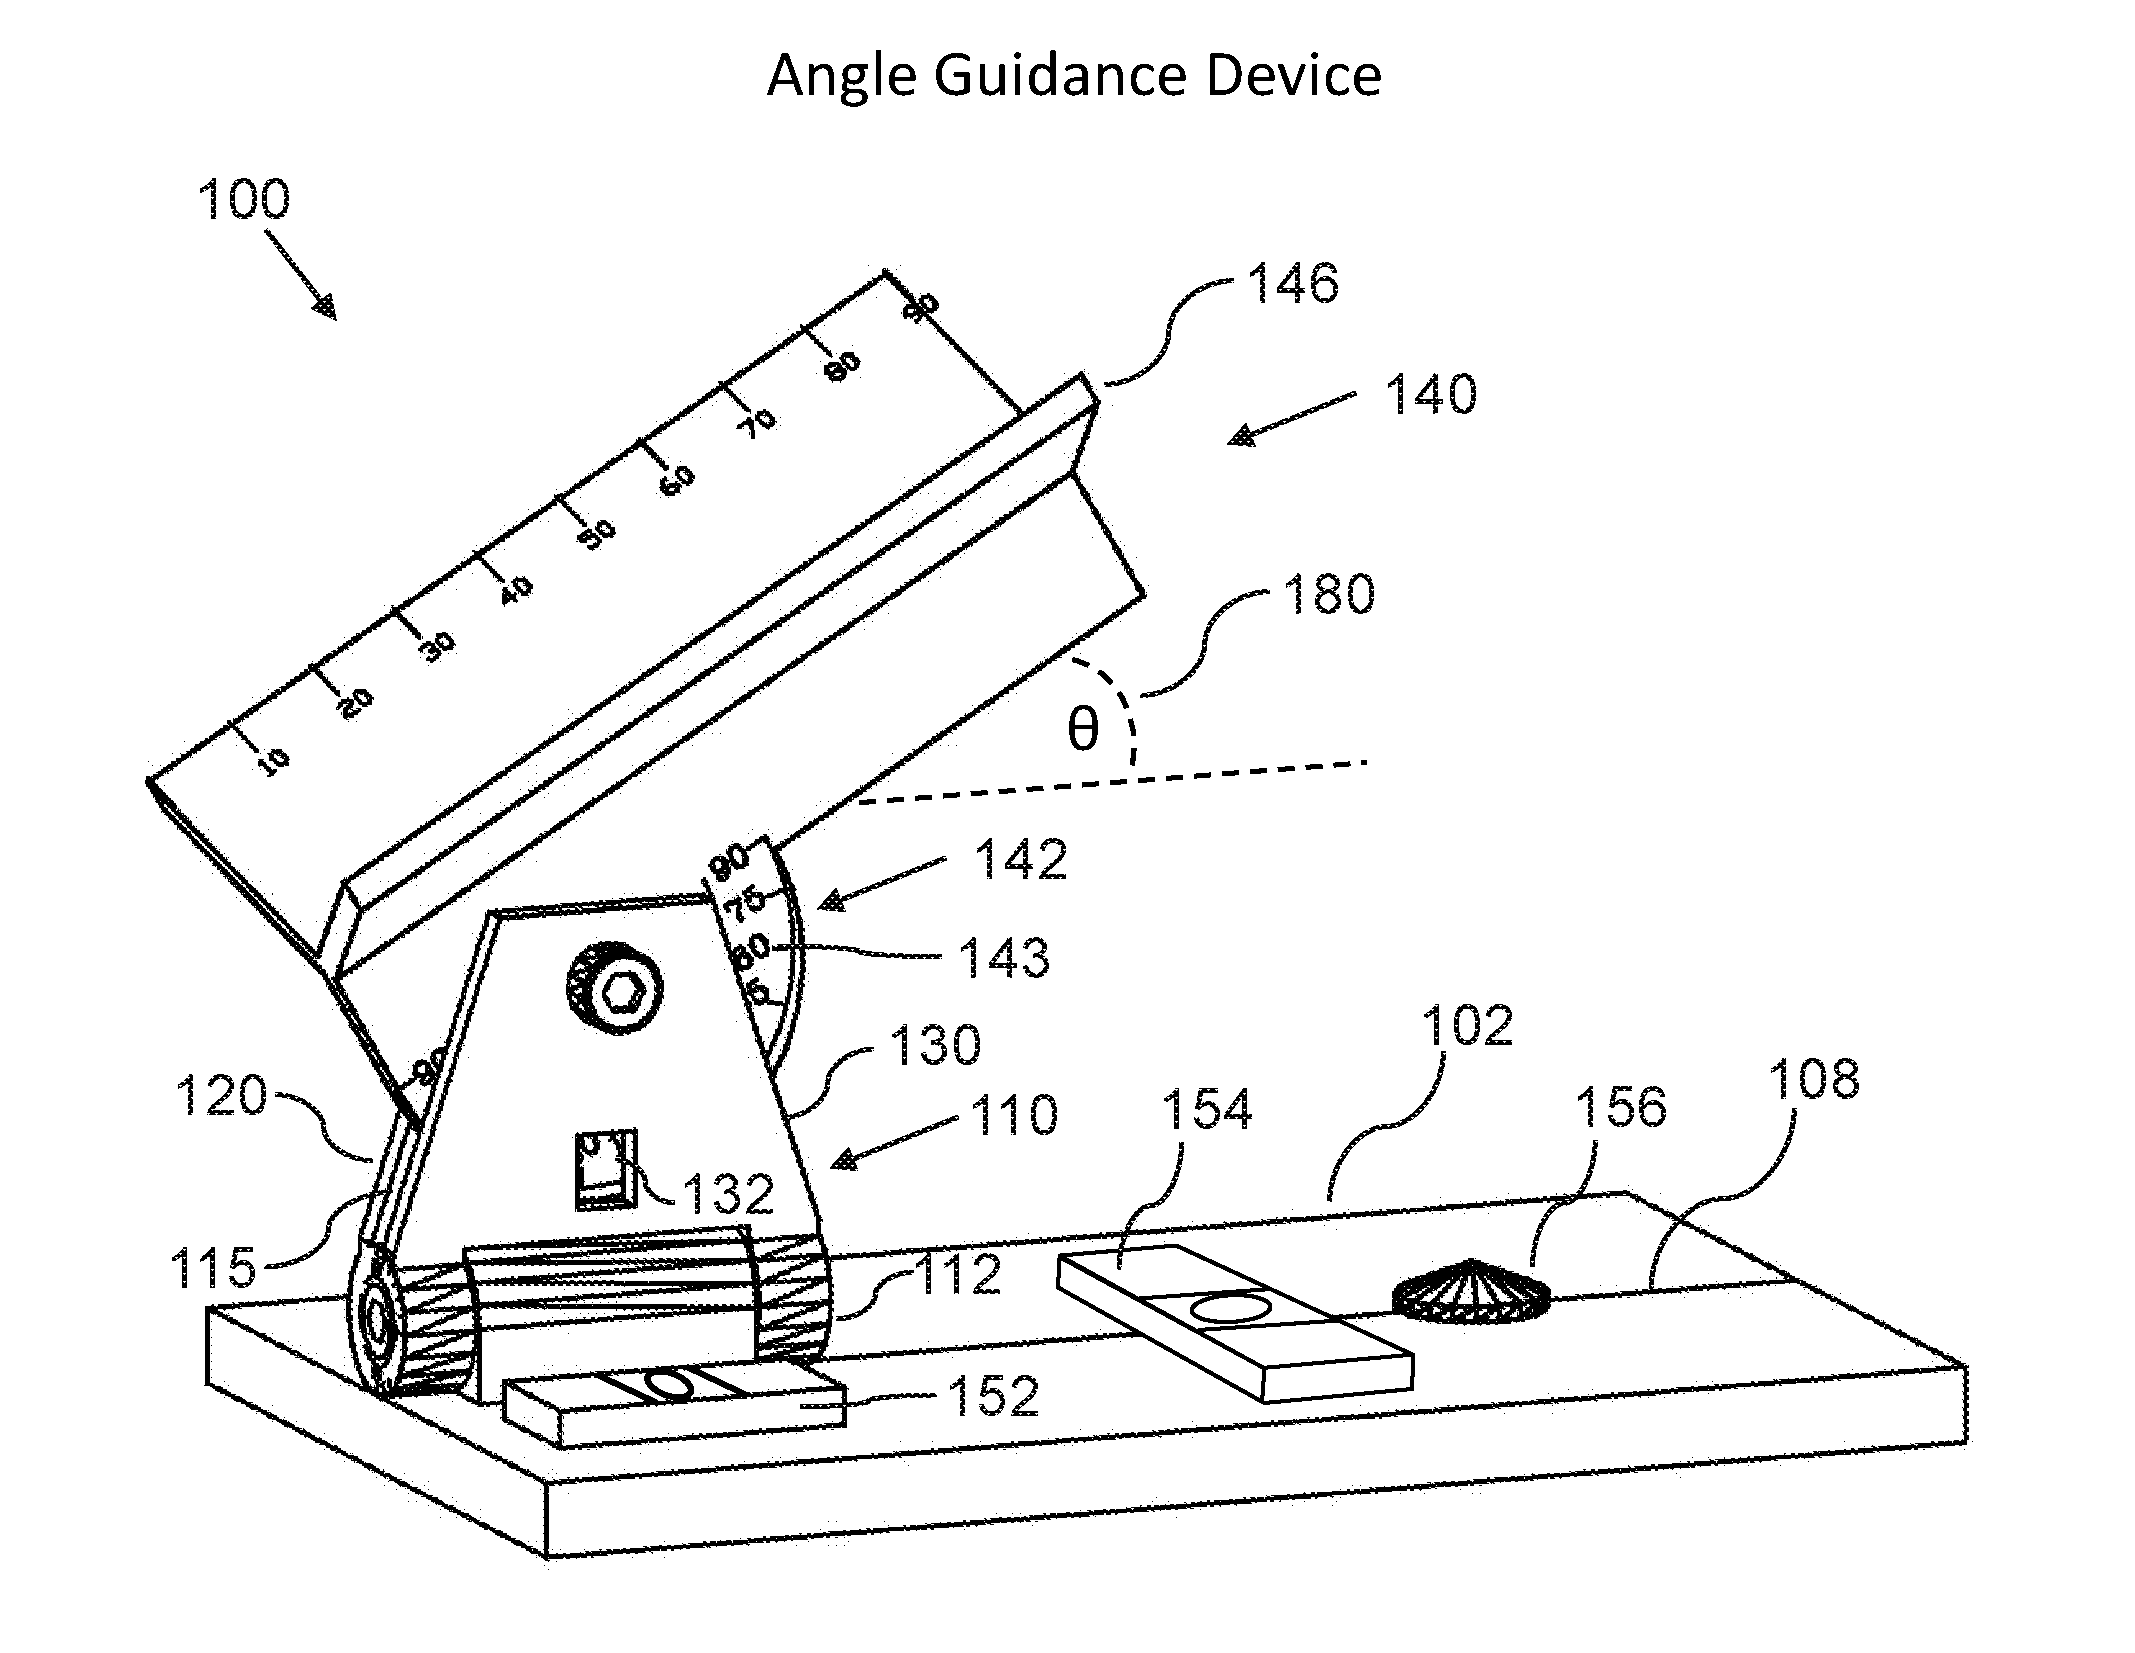 Angle-guidance device and method for CT guided drainage and biopsy procedures